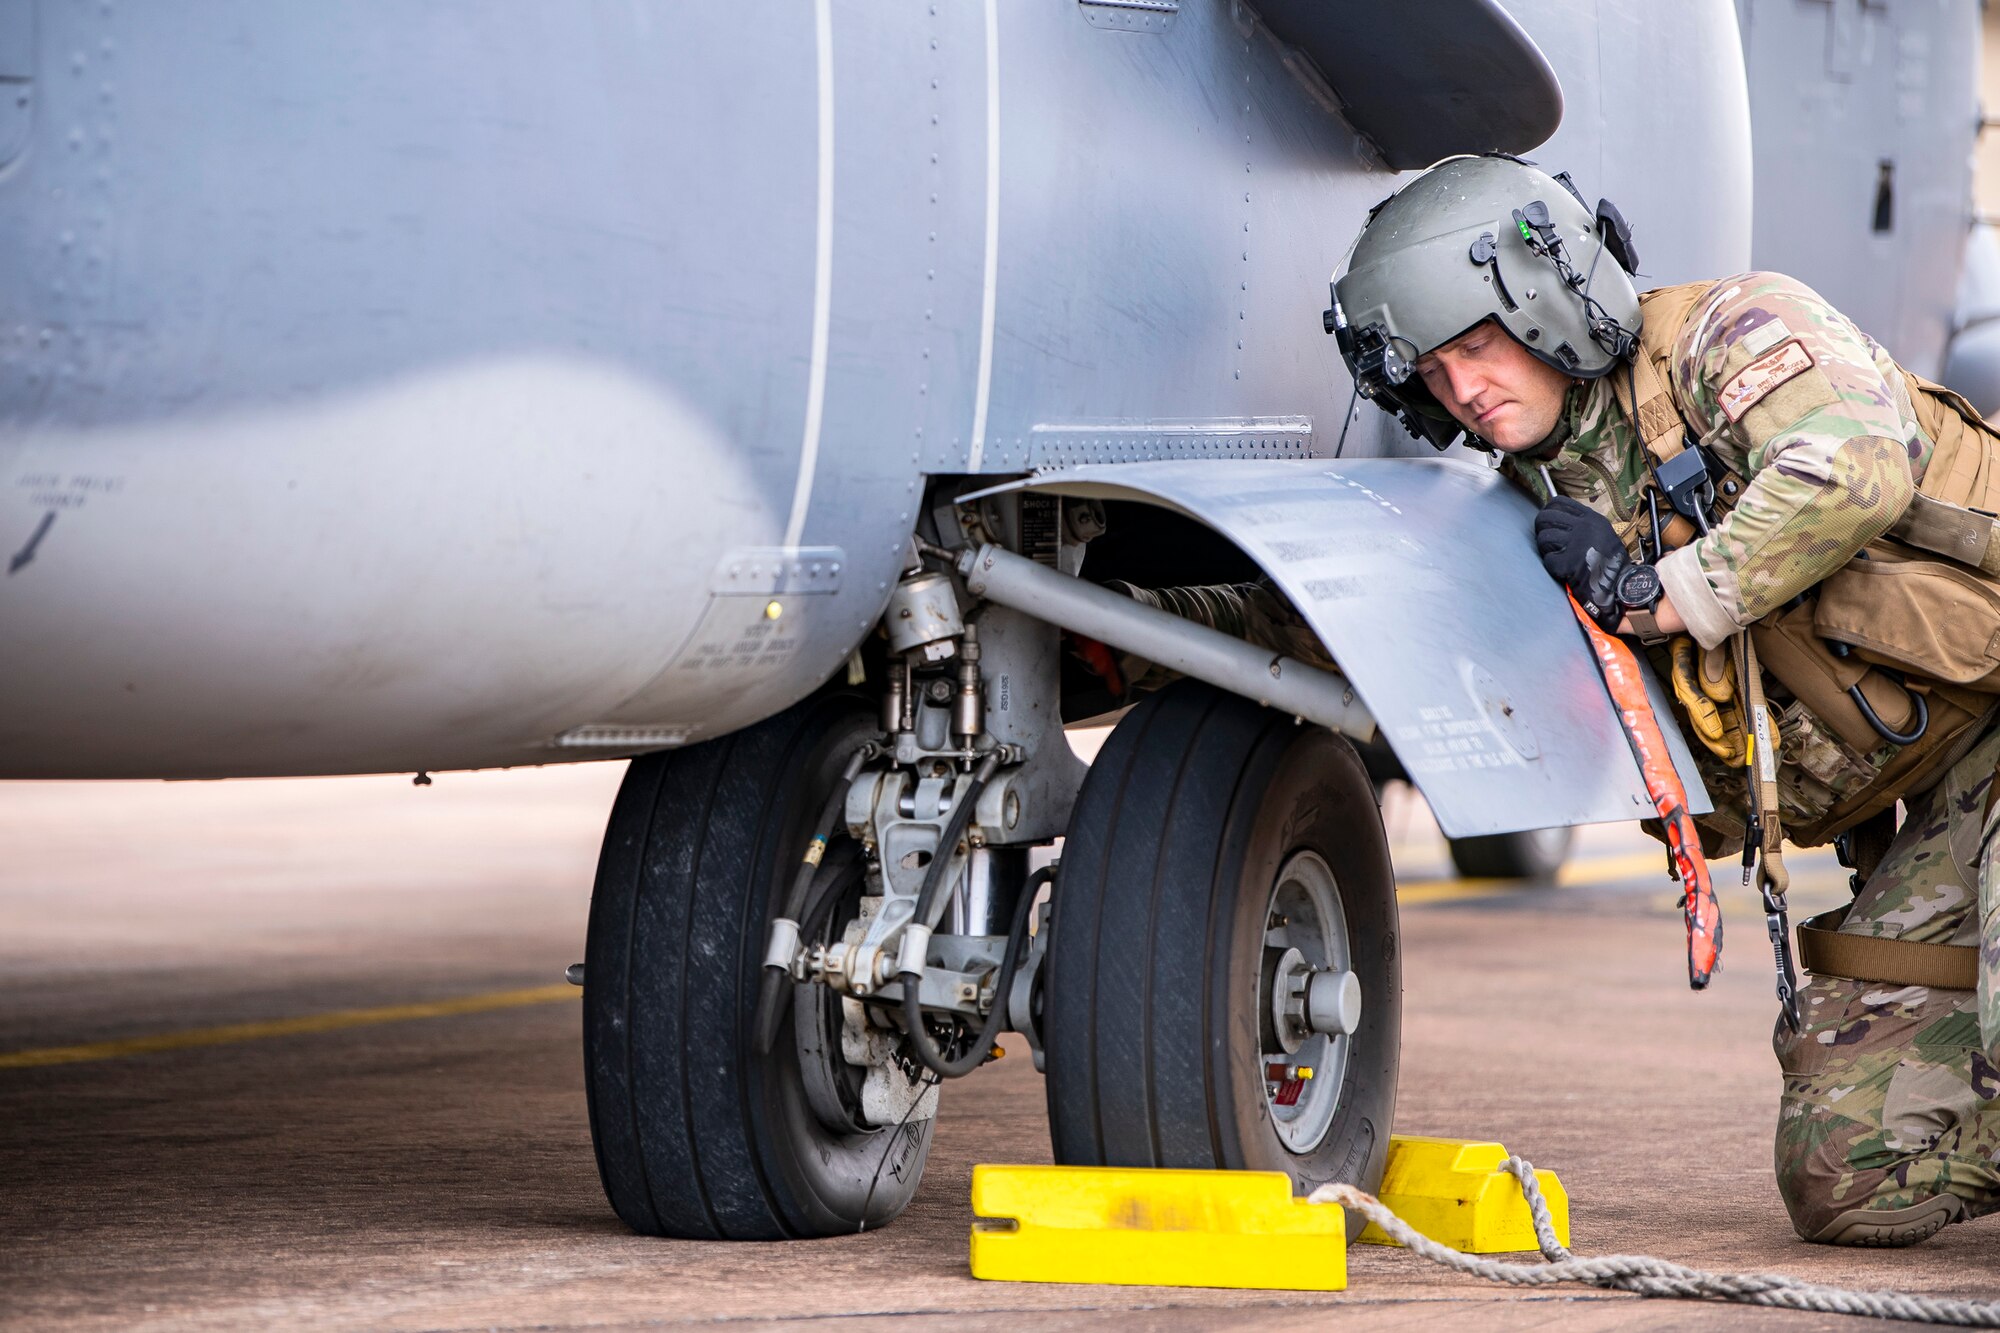 An aircrew member inspects the landing gear of a CV-22A Osprey during an Agile Combat Employment exercise at RAF Fairford, England, Sept. 13, 2021. Airmen from the 501st Combat Support Wing, 100th Air Refueling Wing and 352d Special Operations Wing partnered to conduct an ACE exercise to test their overall readiness and lethality capabilities. The exercise enables U.S. forces in Europe to operate from locations with varying levels of capacity and support. (U.S. Air Force photo by Senior Airman Eugene Oliver)